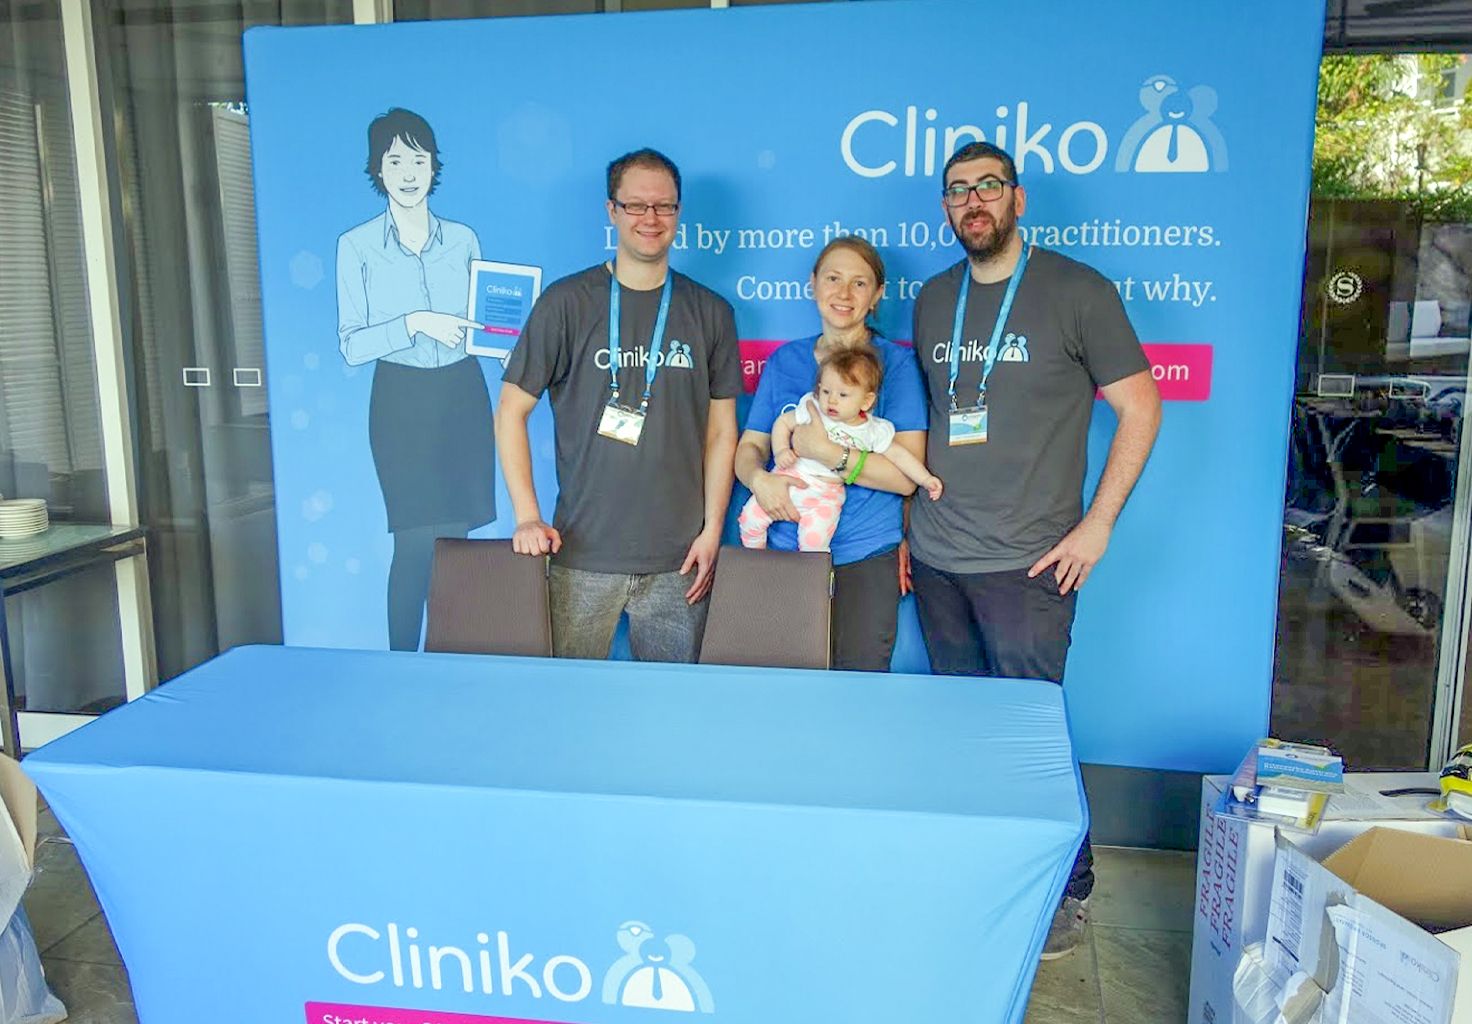 A photo of Cliniko's first conference stand.